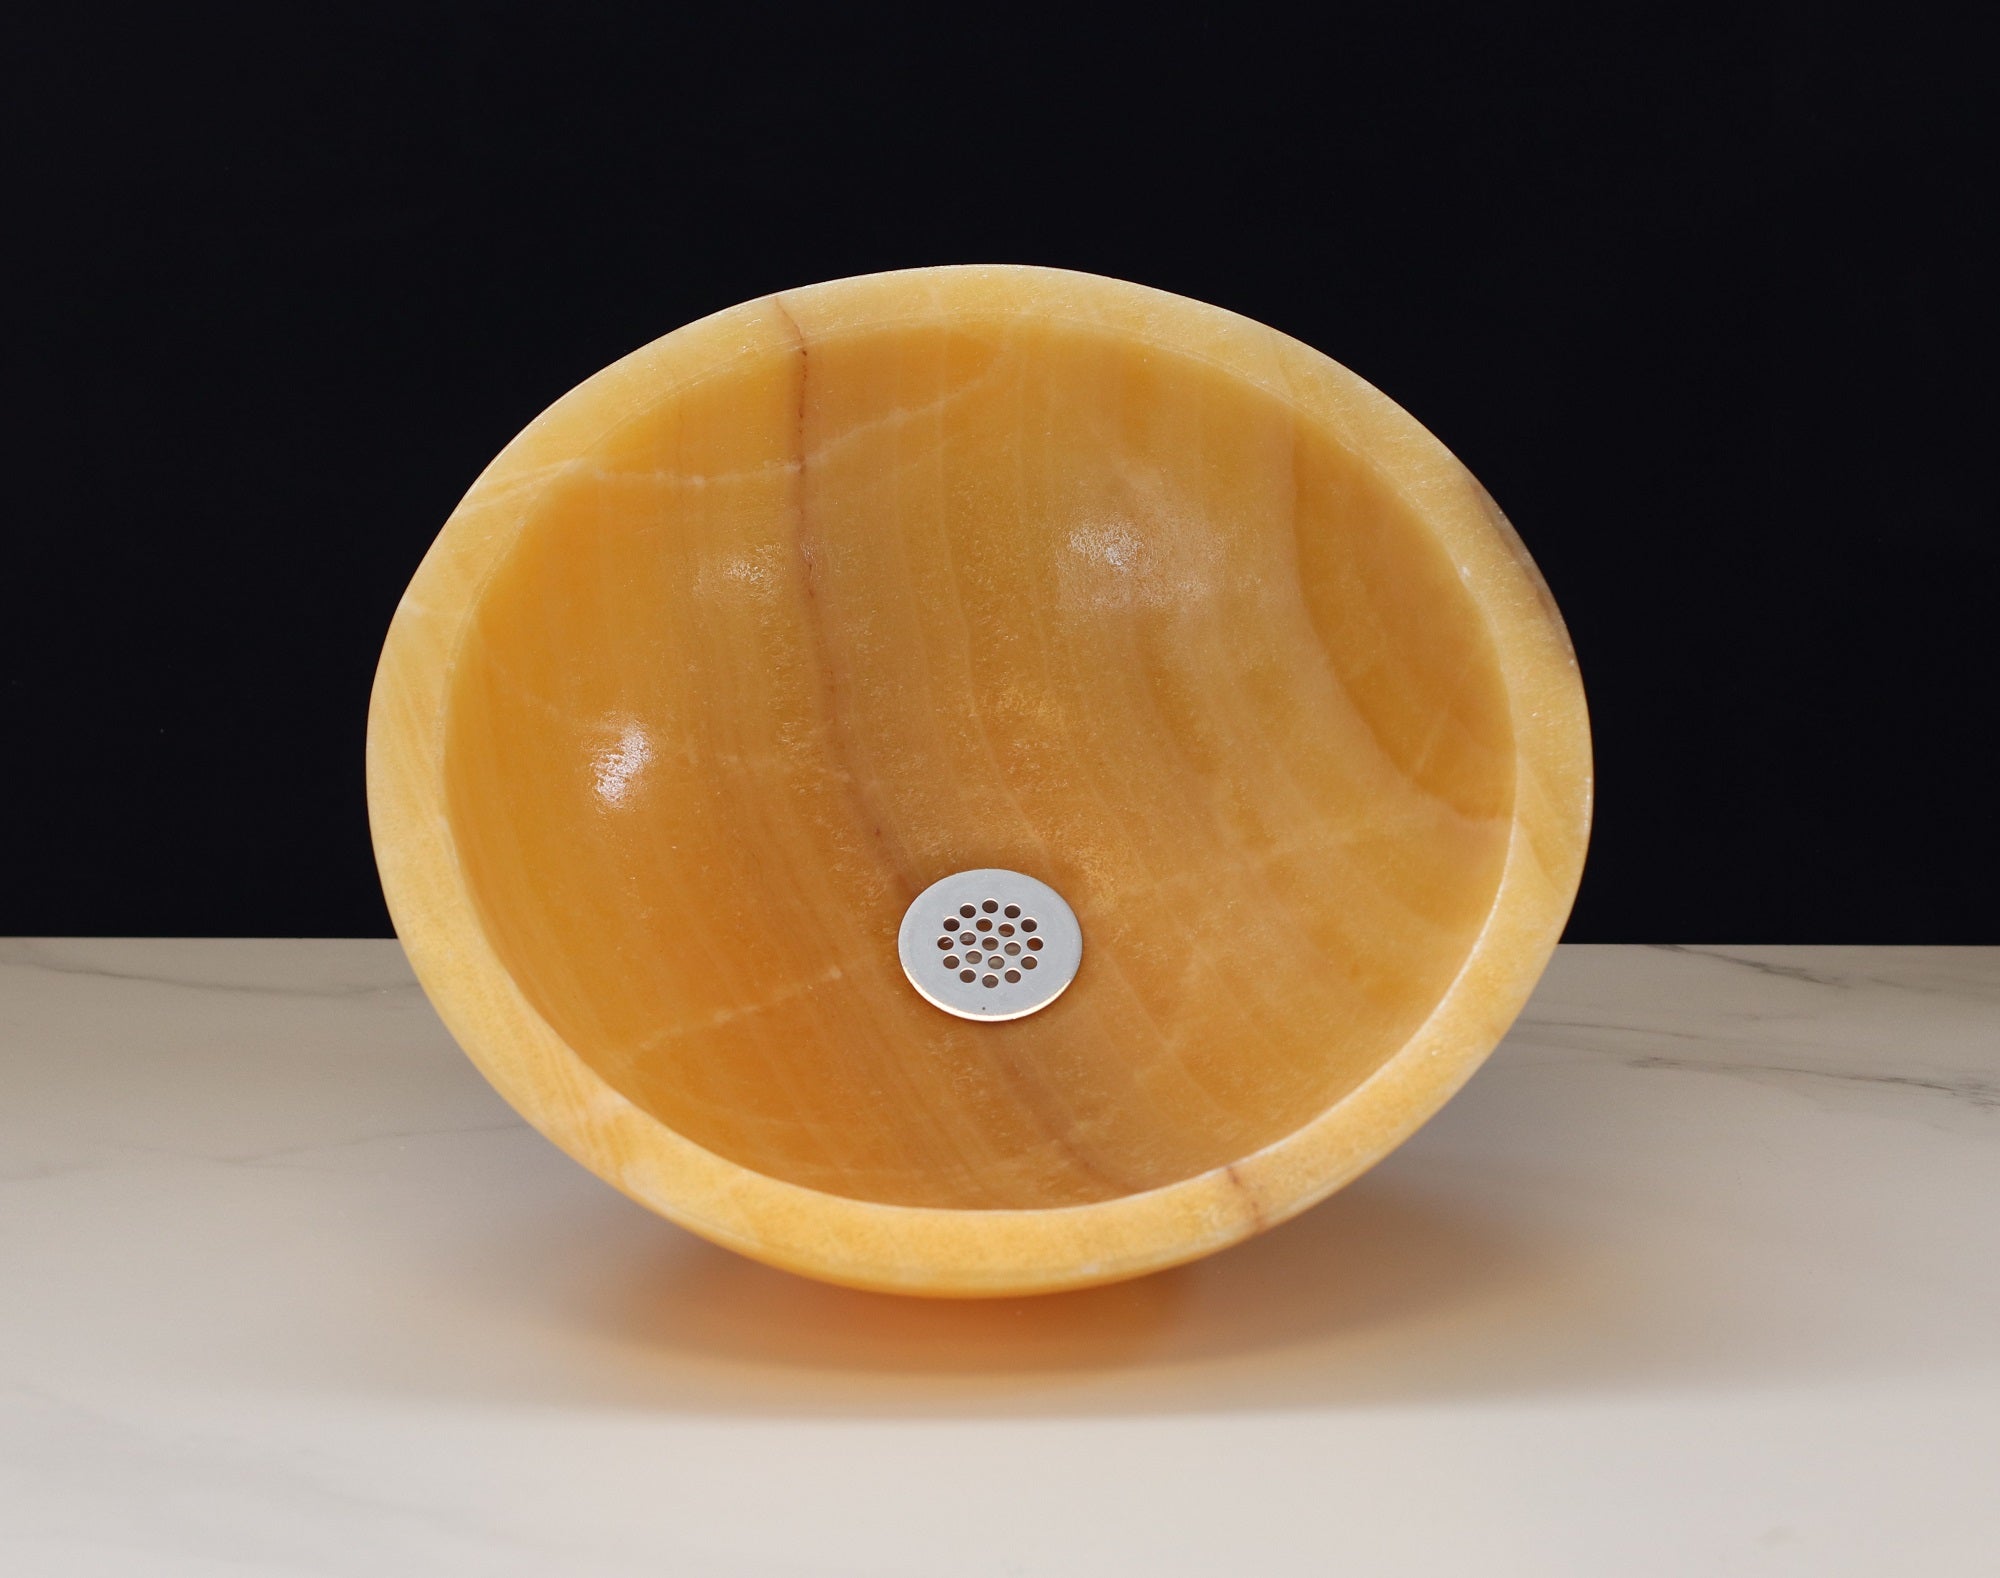 Beige and Orange Round Onyx Stone Bathroom Vessel Sink. A beautiful work of art. We offer fast shipping. Handmade in Mexico. We hand finish, package, and ship from the USA. Buy now at www.felipeandgrace.com. 